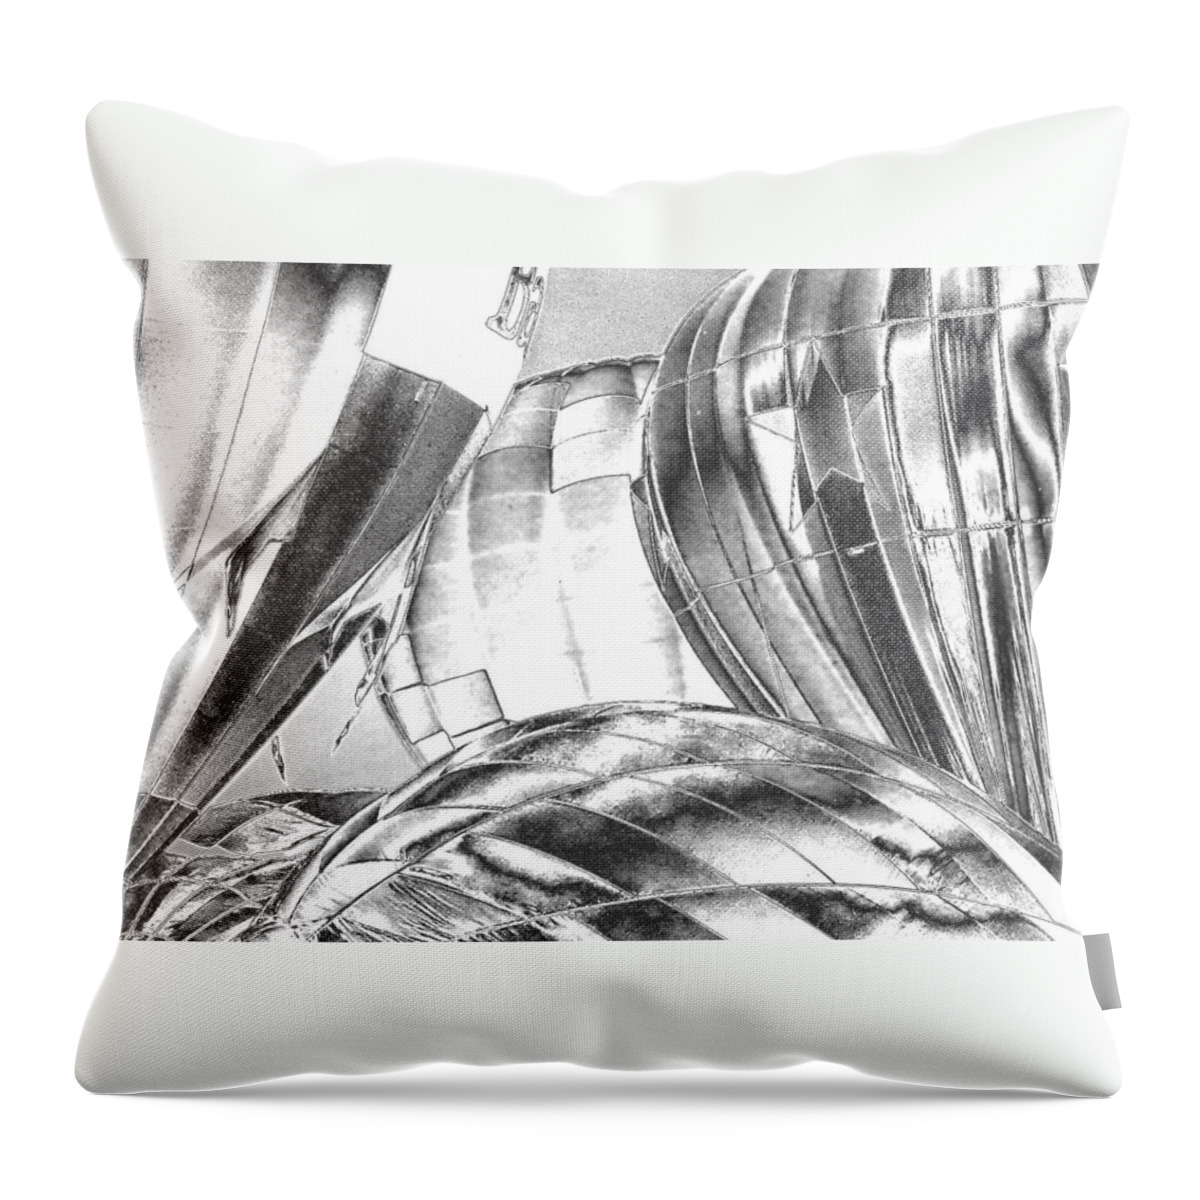 Balloon Festival Throw Pillow featuring the photograph Chromed Hot Air Balloons by Belinda Lee